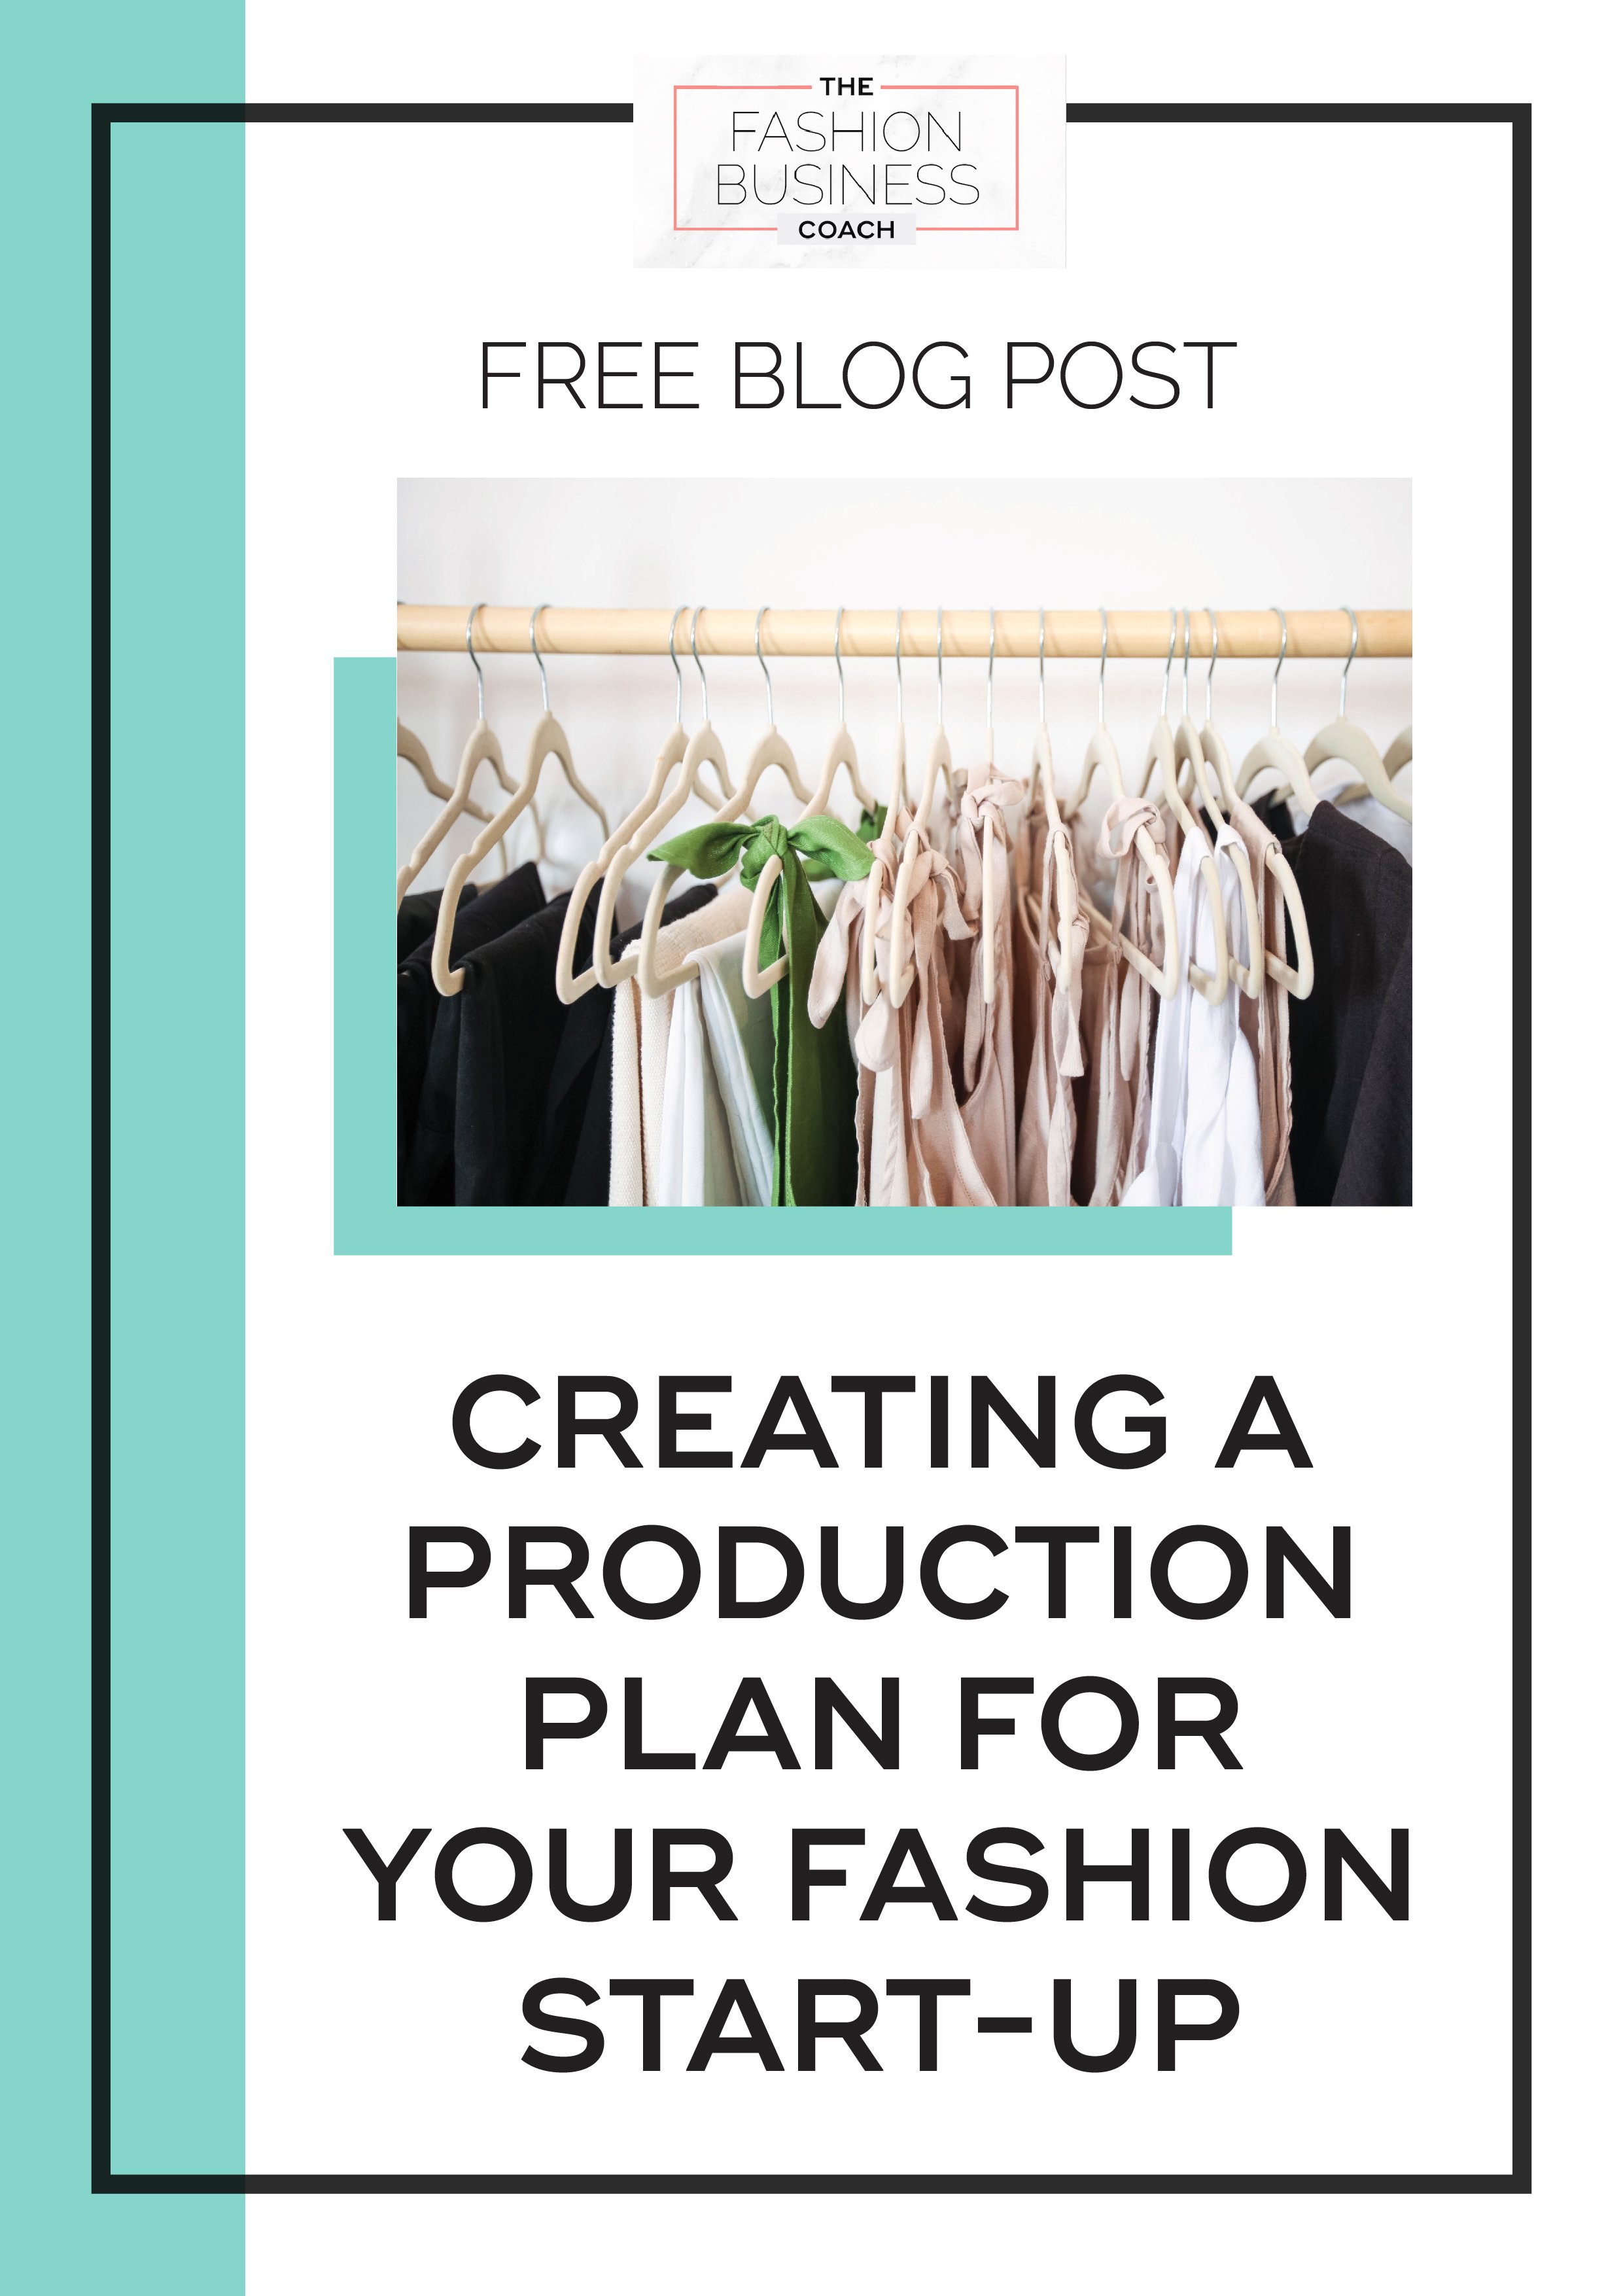 Pinterest_Creating a Production Plan for Your Fashion Start-up 2.jpg